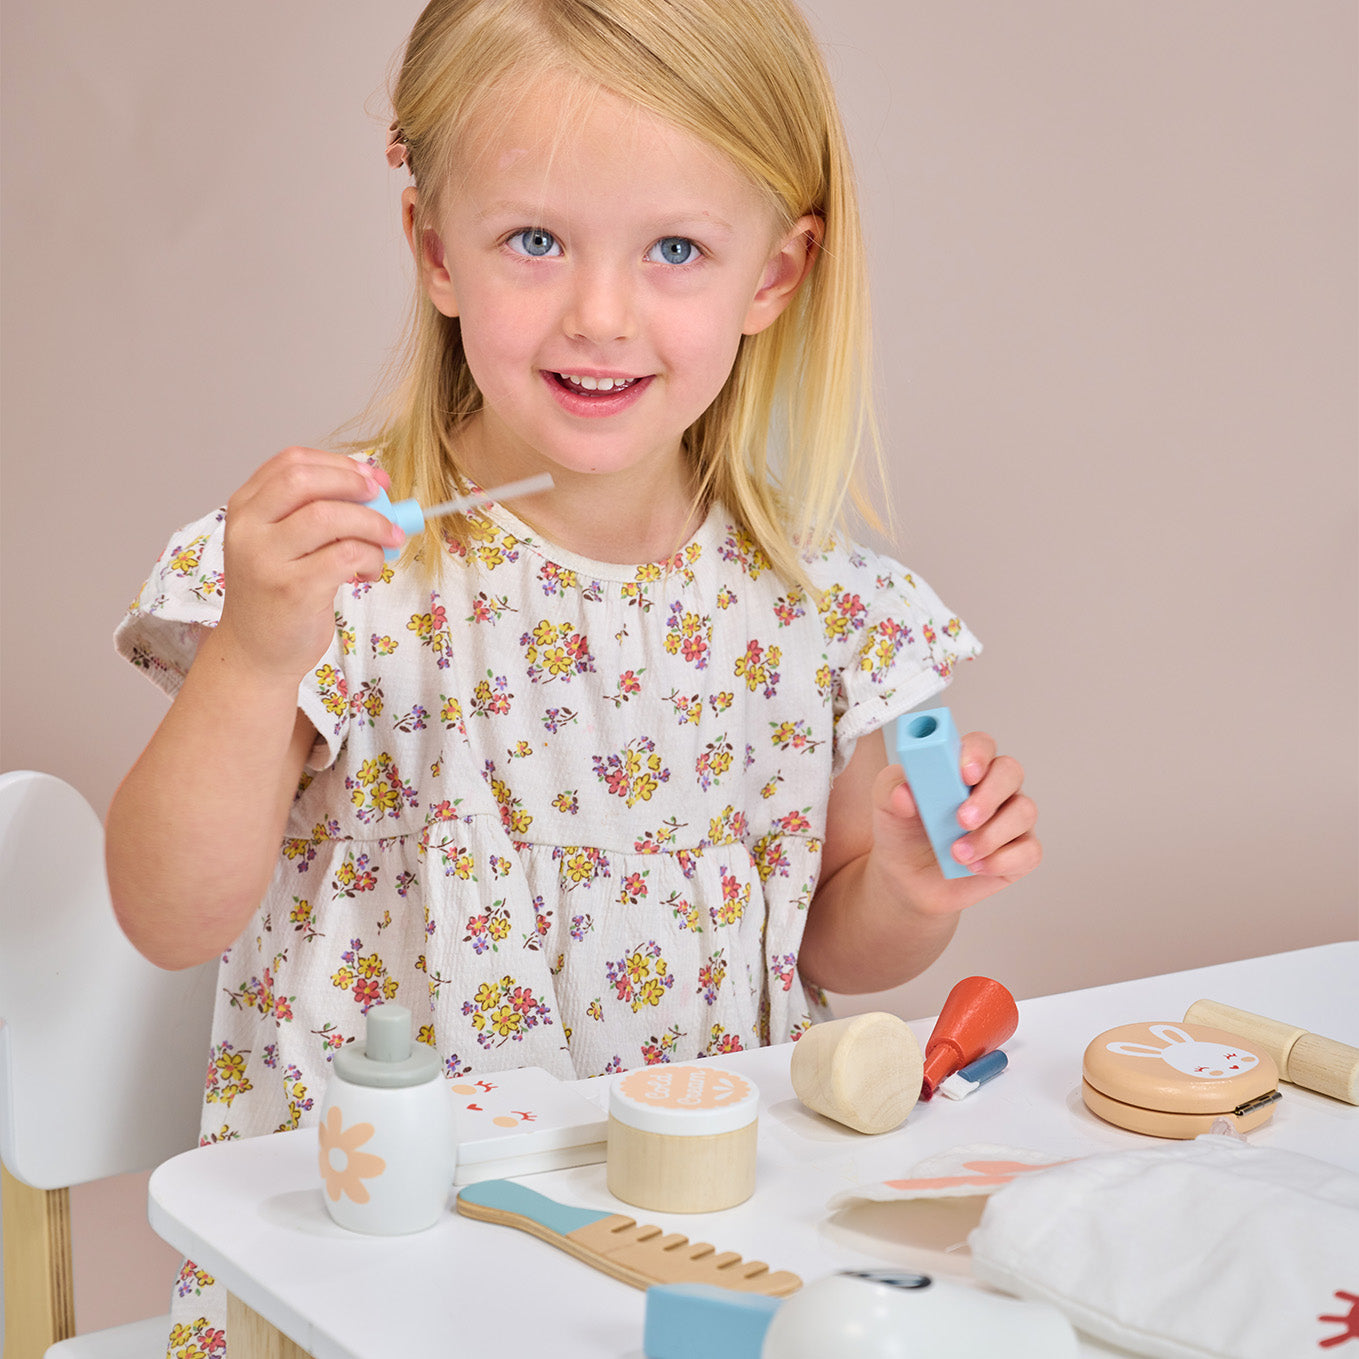 Child playing with wooden toy bunny themed make up set